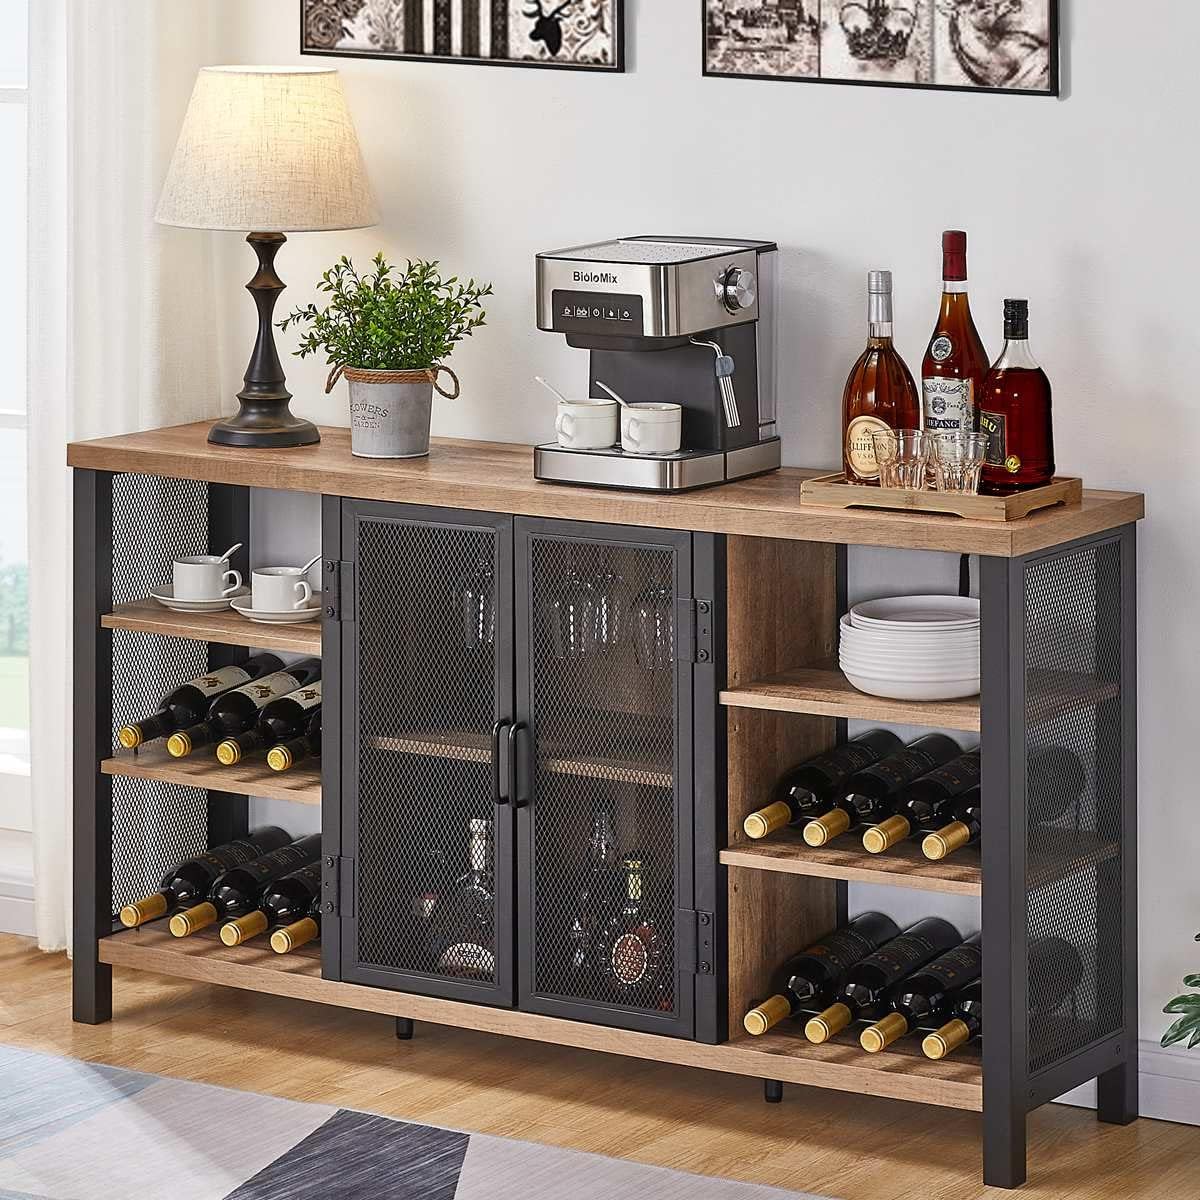 FATORRI Industrial Wine Bar Cabinet for Liquor and Glasses, Farmhouse Wood Coffee Cabinet with Wine Rack, Metal Sideboard and Buffet Cabinet (55 Inch, Rustic Oak)